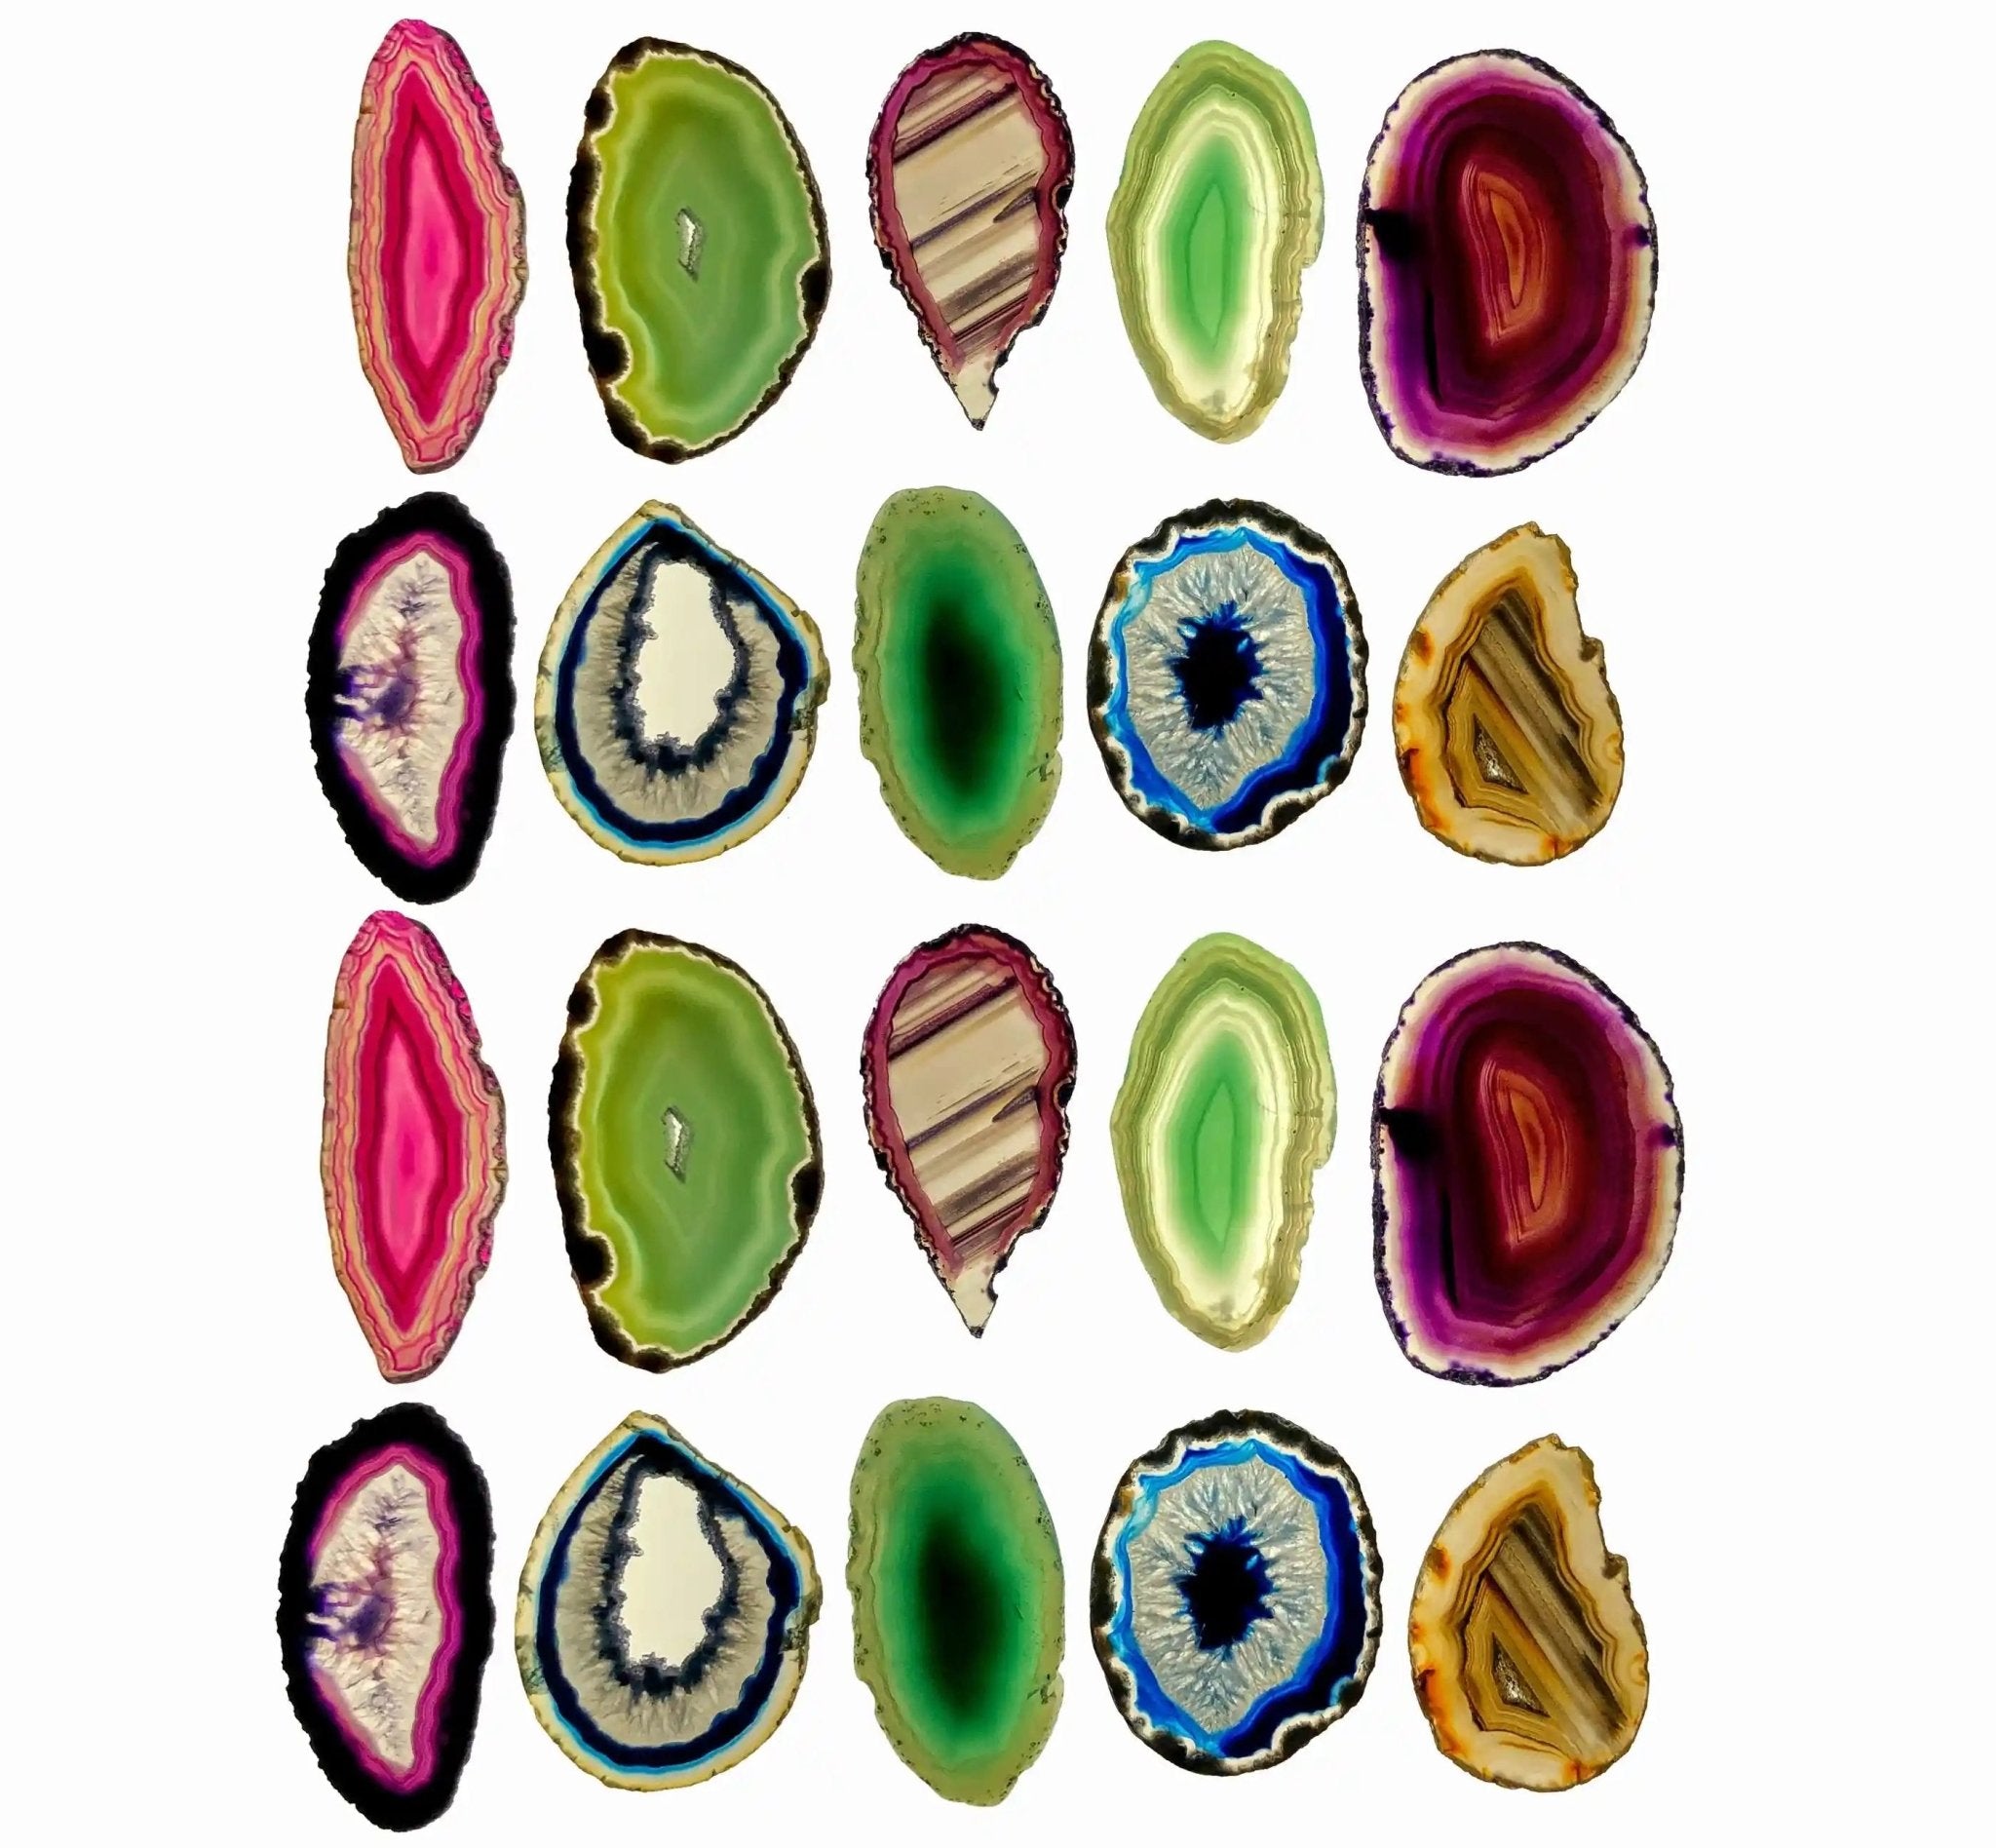 Polished Natural & Dyed Agate slices Mix, No drilled pendant hole, 1.5" to 3", 10 pieces #5054CONO - Brazil GemsBrazil GemsPolished Natural & Dyed Agate slices Mix, No drilled pendant hole, 1.5" to 3", 10 pieces #5054CONOSlices for Crafts5054CONO